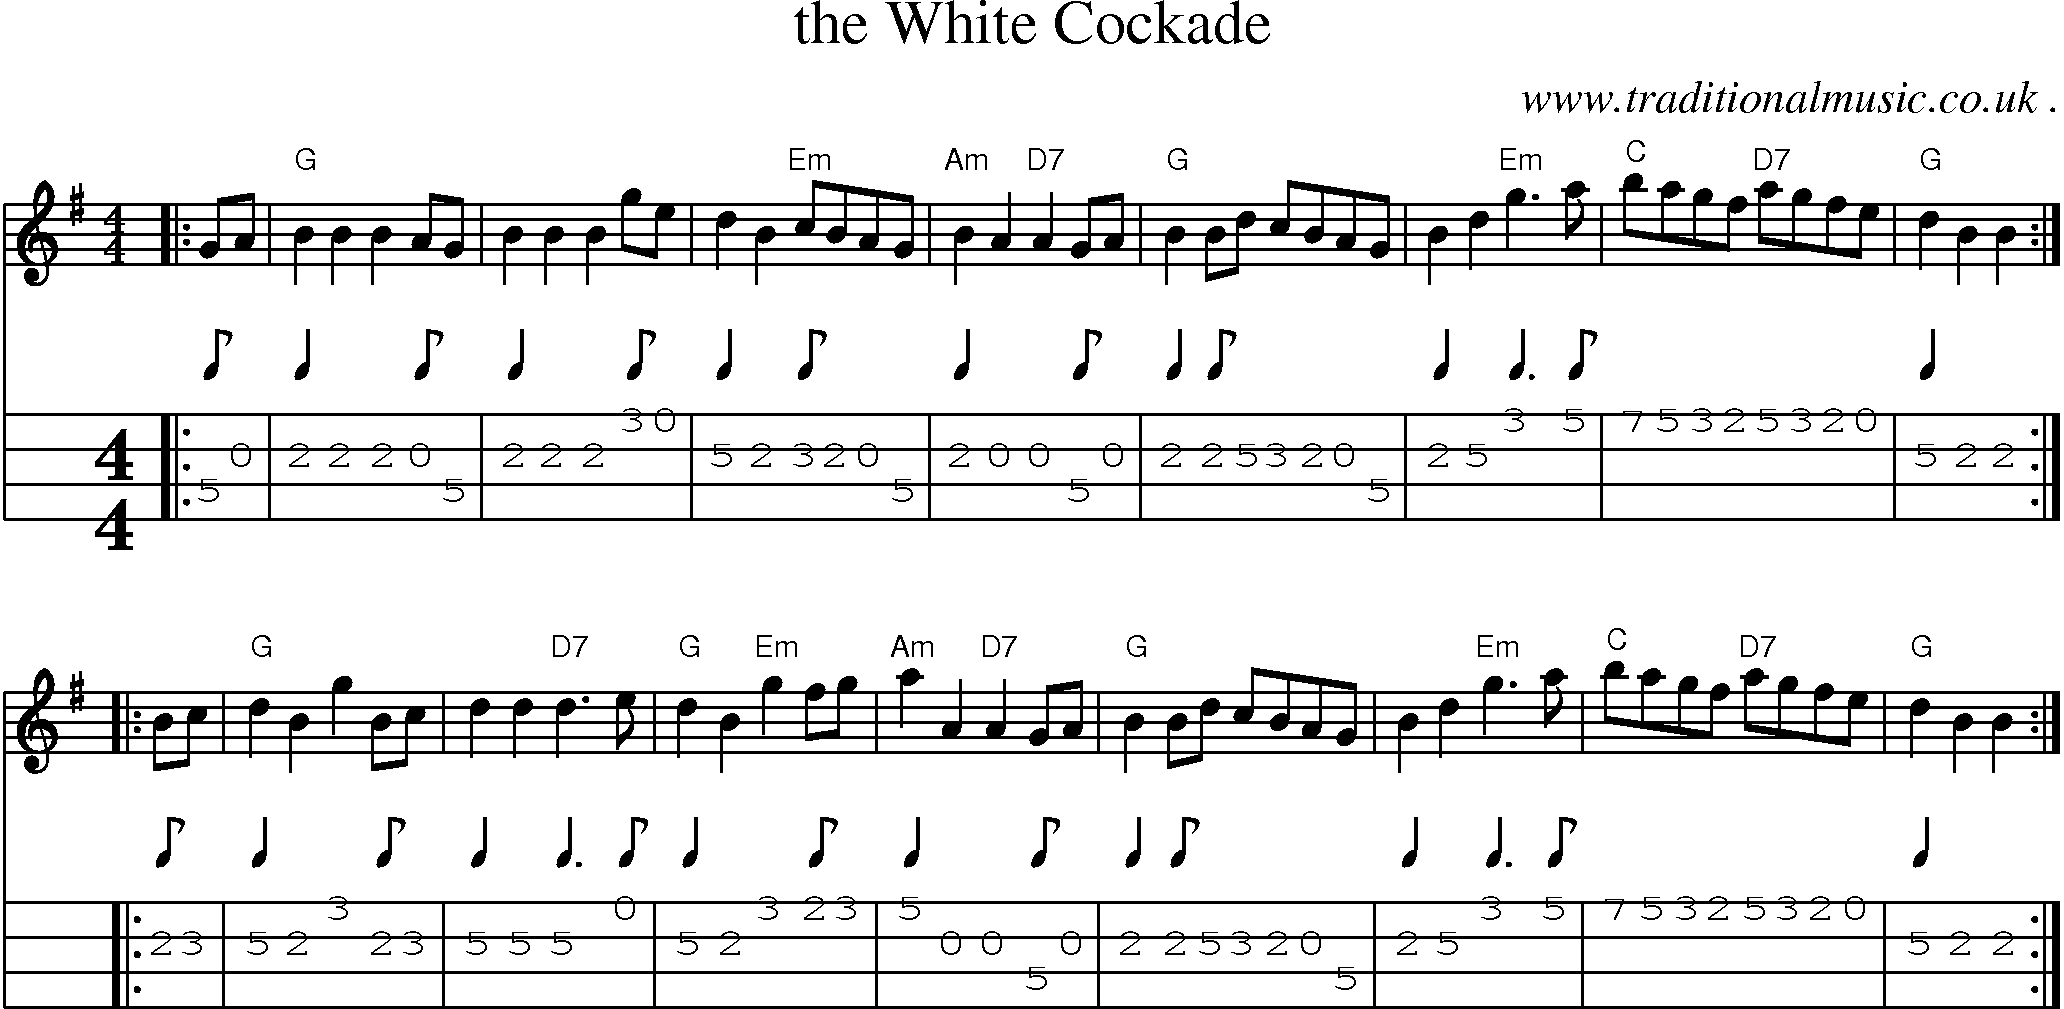 Sheet-music  score, Chords and Mandolin Tabs for The White Cockade